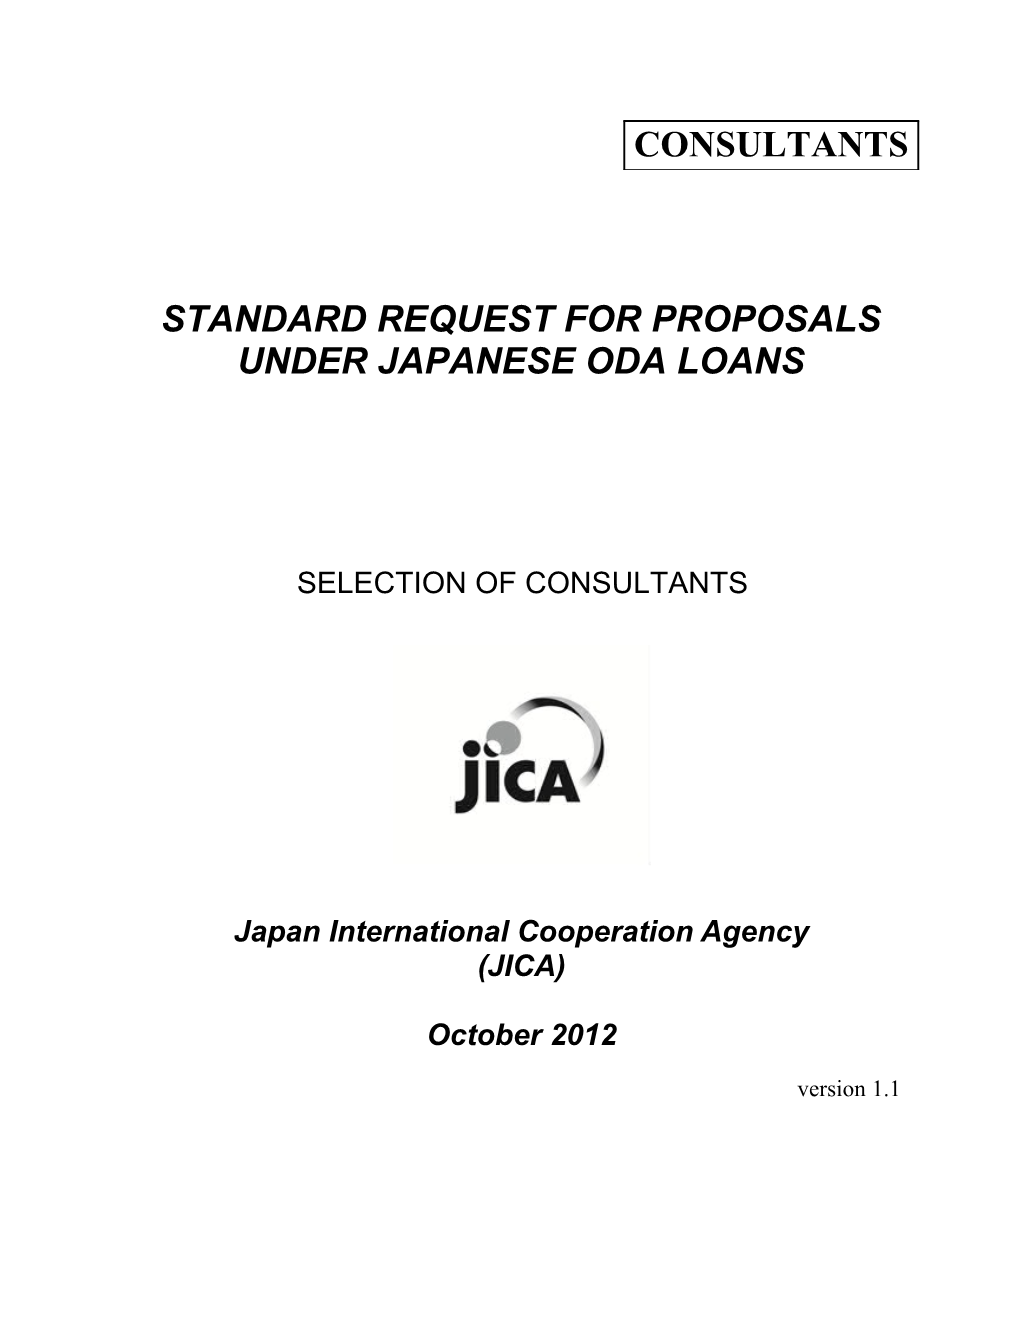 Standard Request for Proposals s1